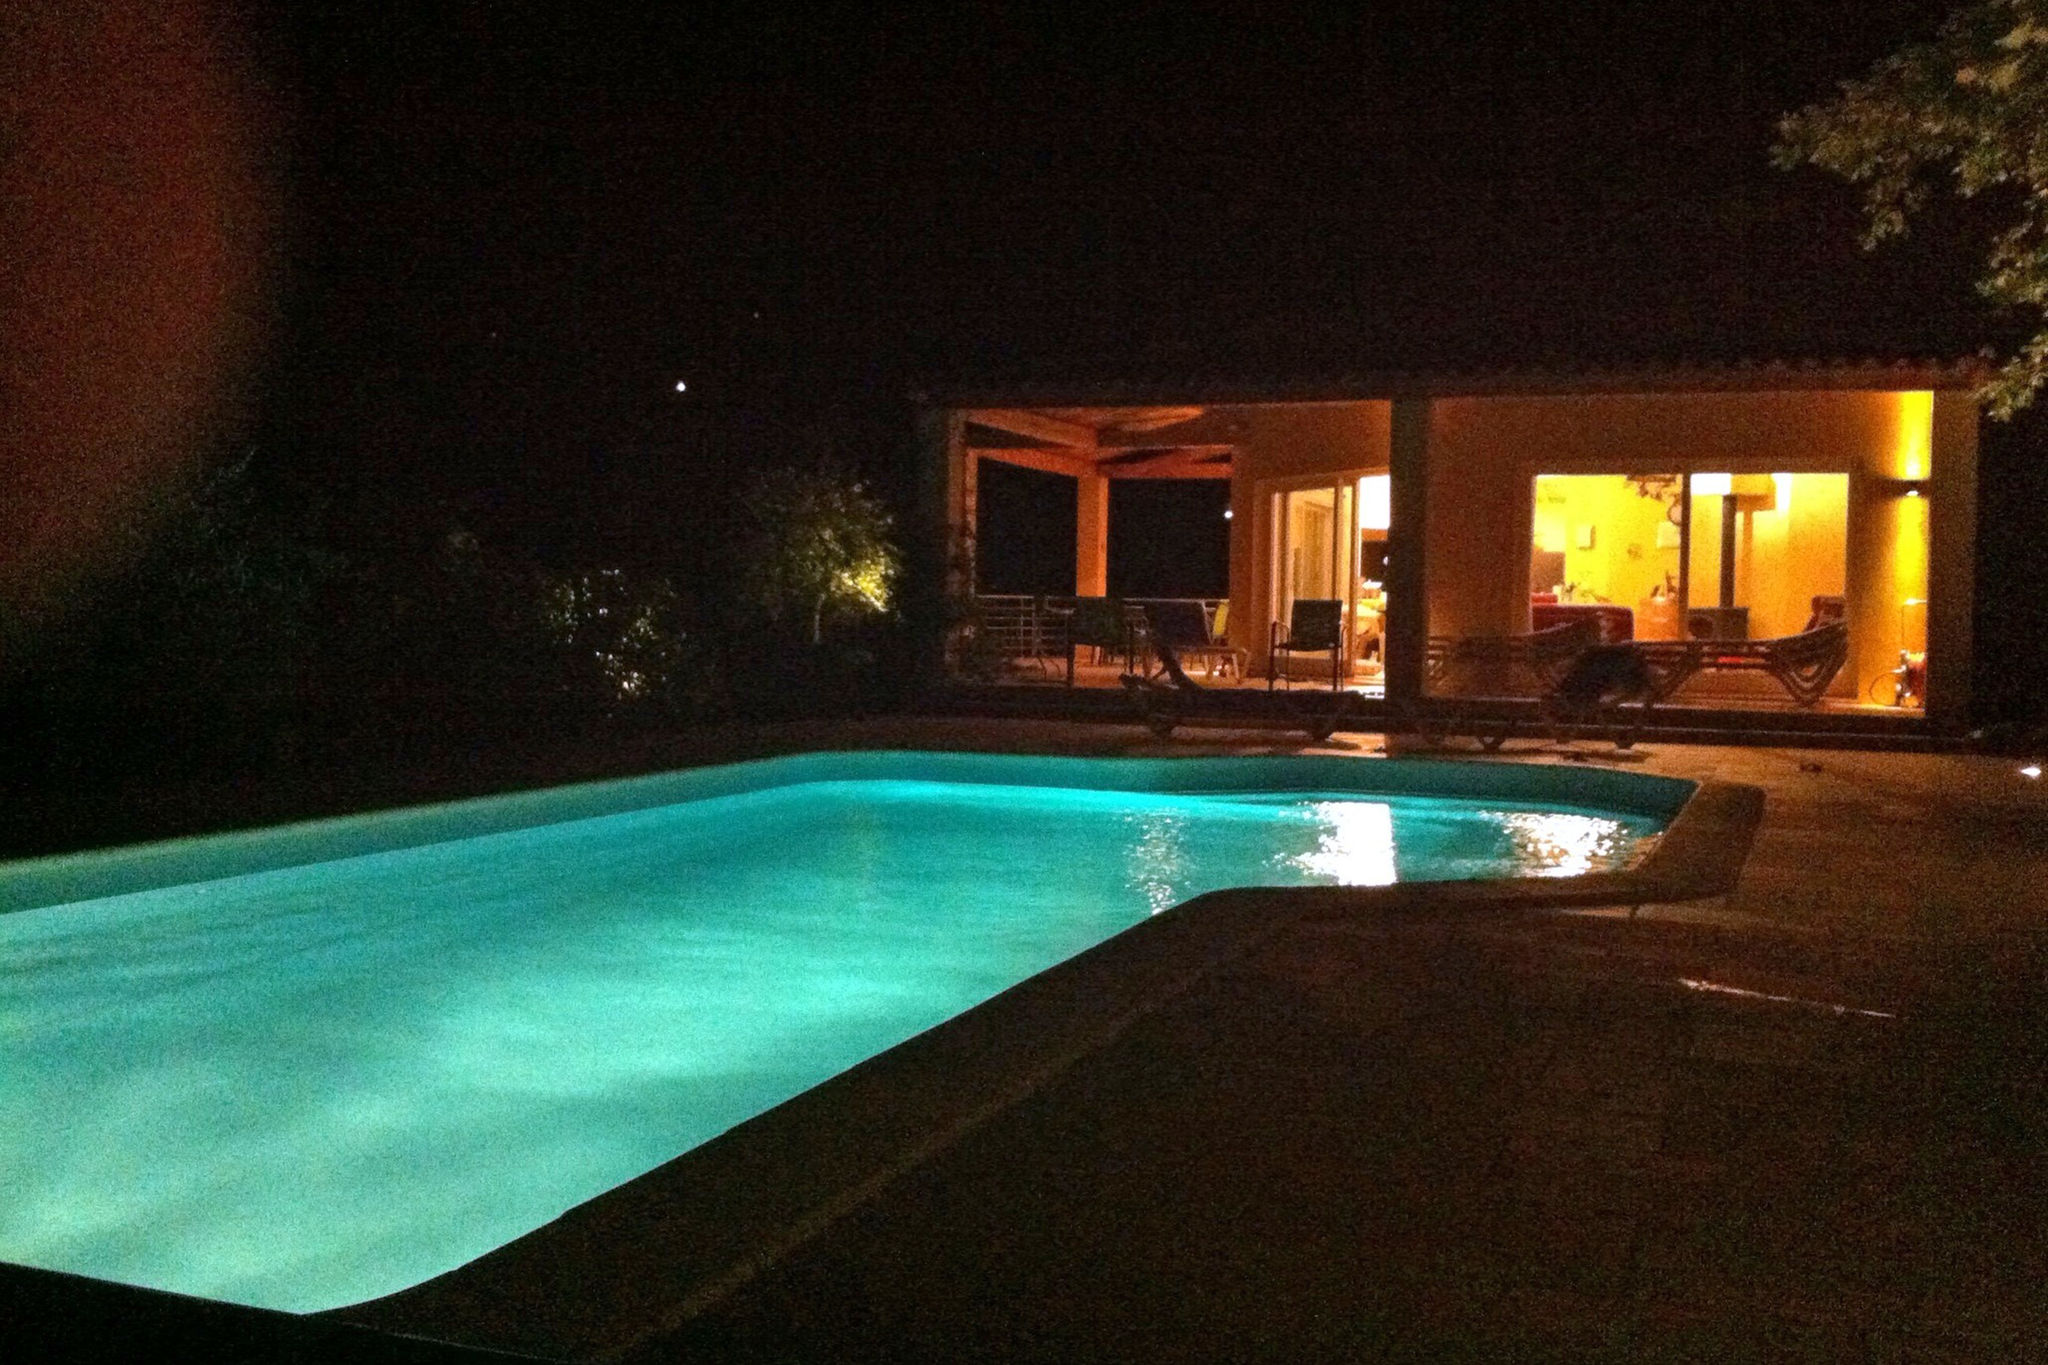 Tranquil Villa in Bargemon with Private Pool